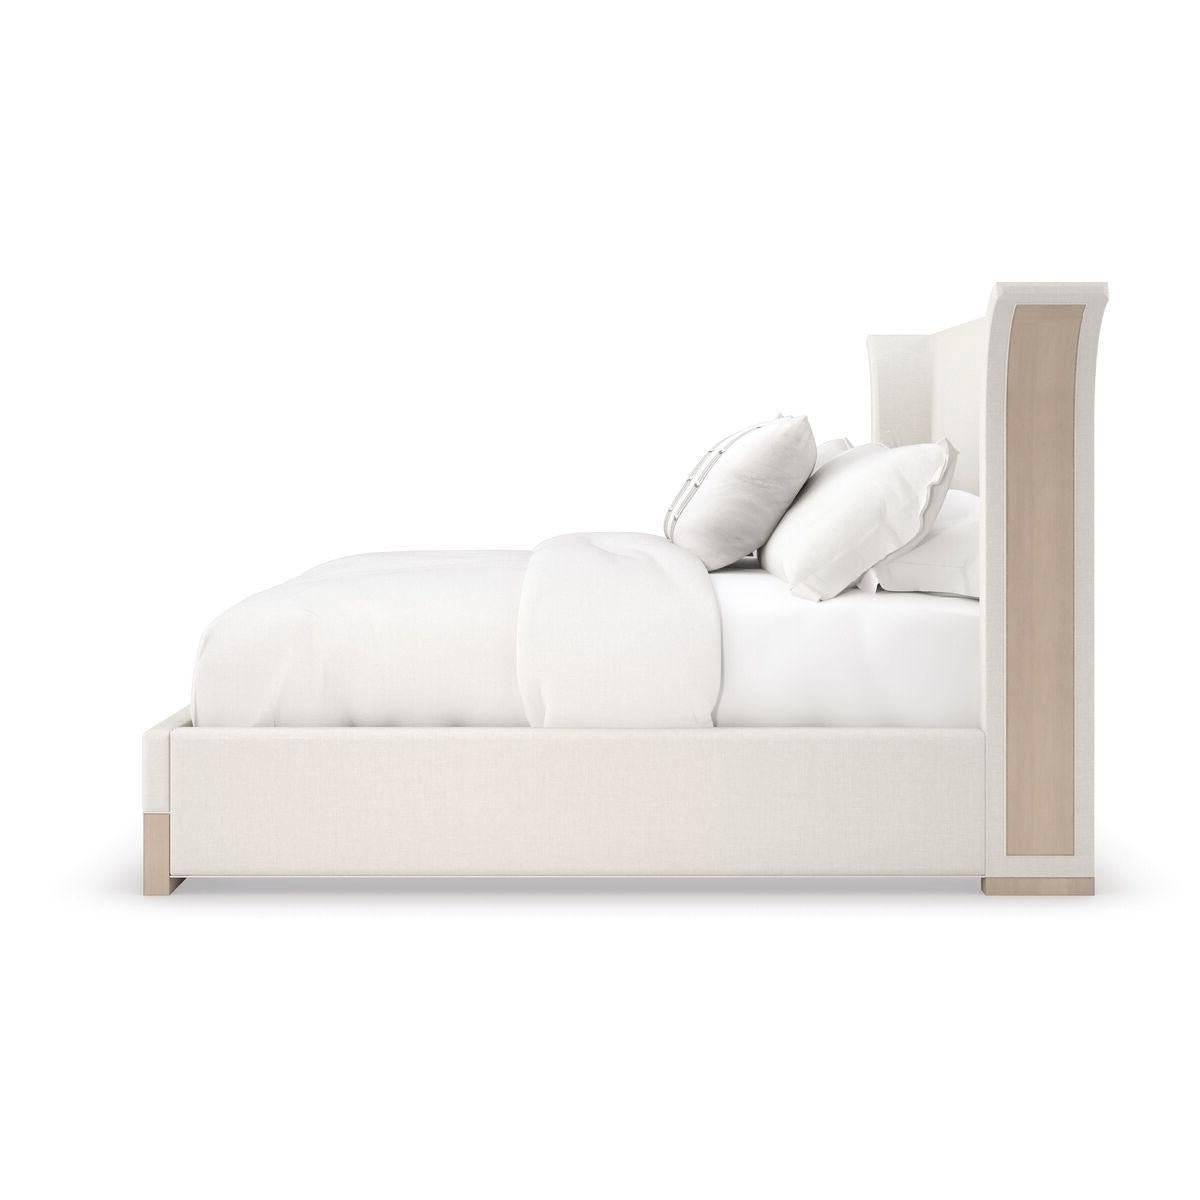 Asian Flared Modern Upholstered Bed - Queen For Sale